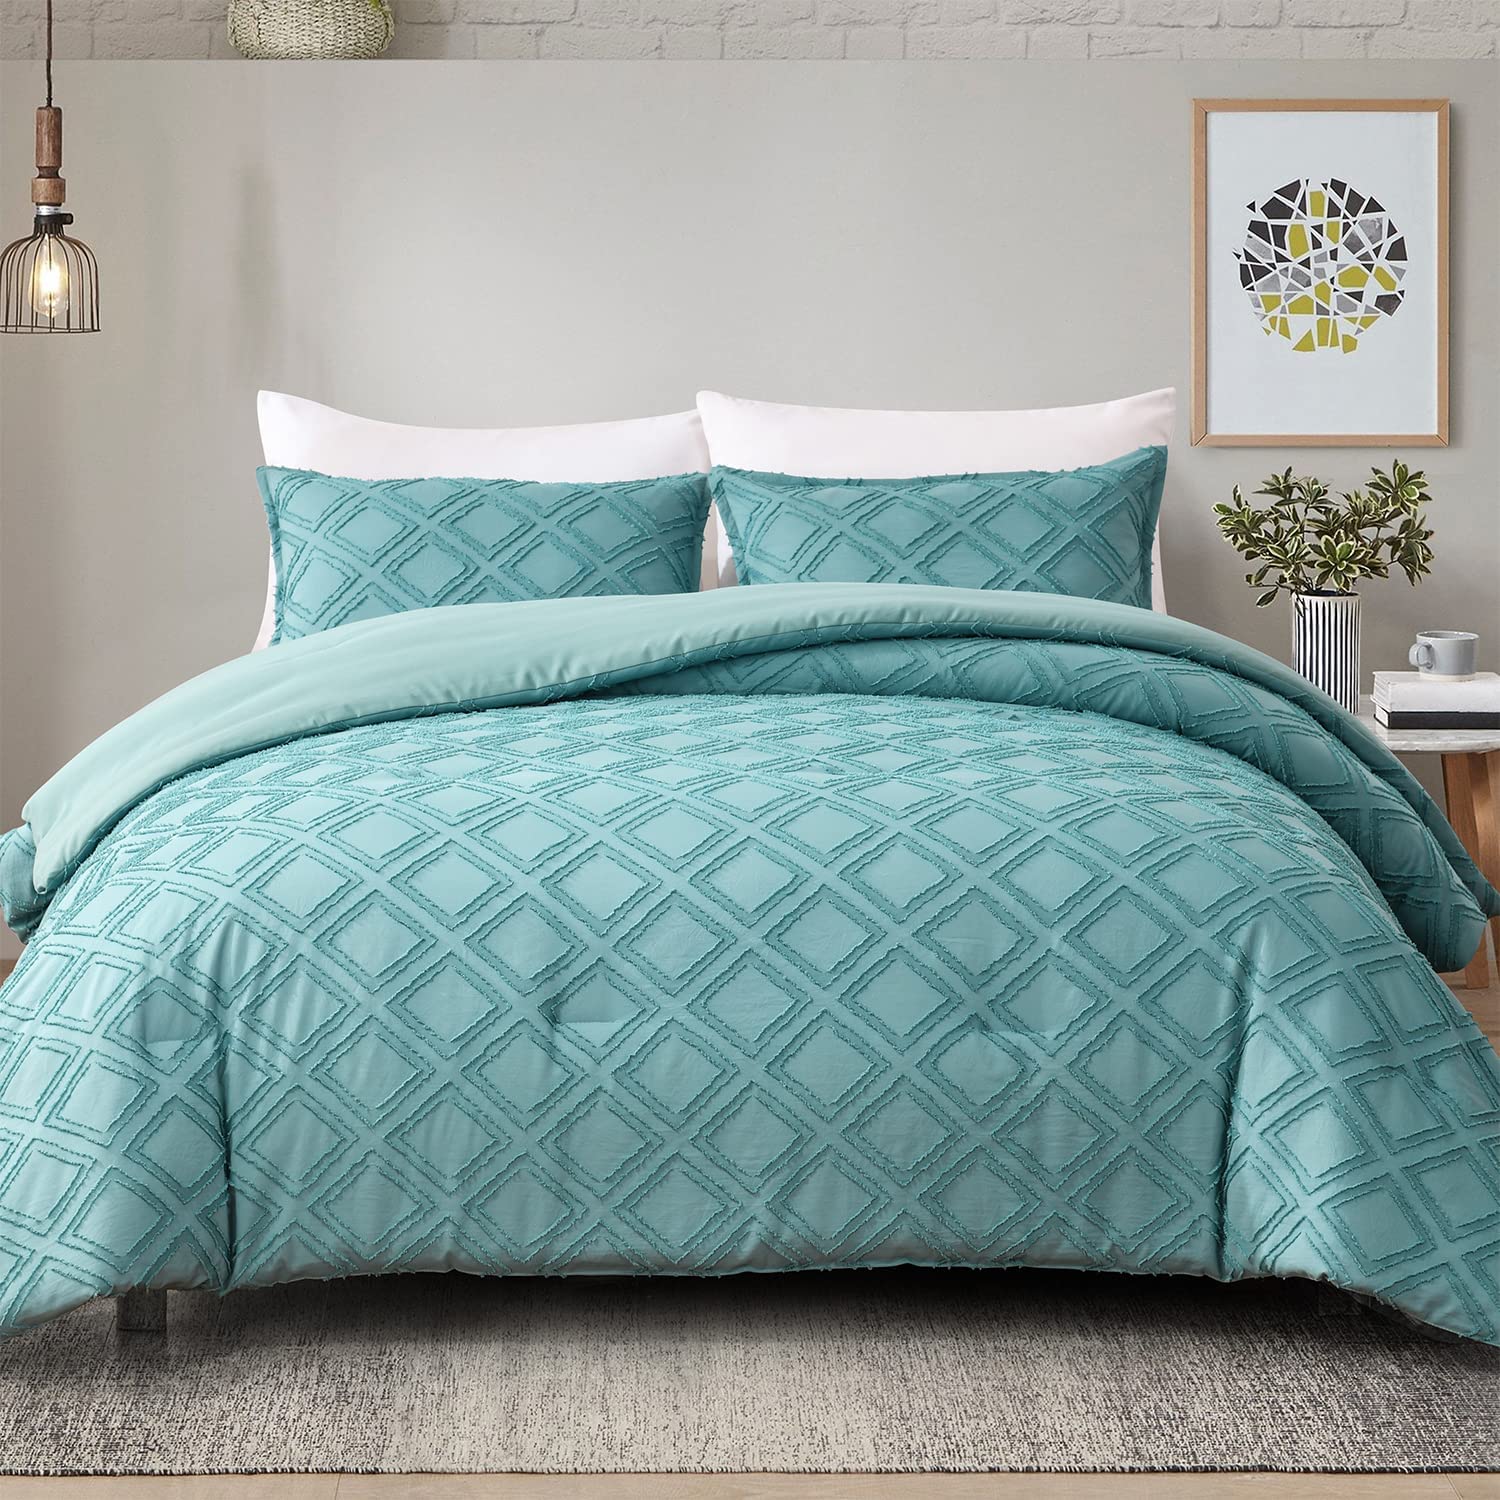 Wellco 7 Piece Bed-in-A-Bag Comforter Bedding Set- All Season Bedding Comforter Set, Ultra Soft Polyester Checkered Tufted Bedding Comforters